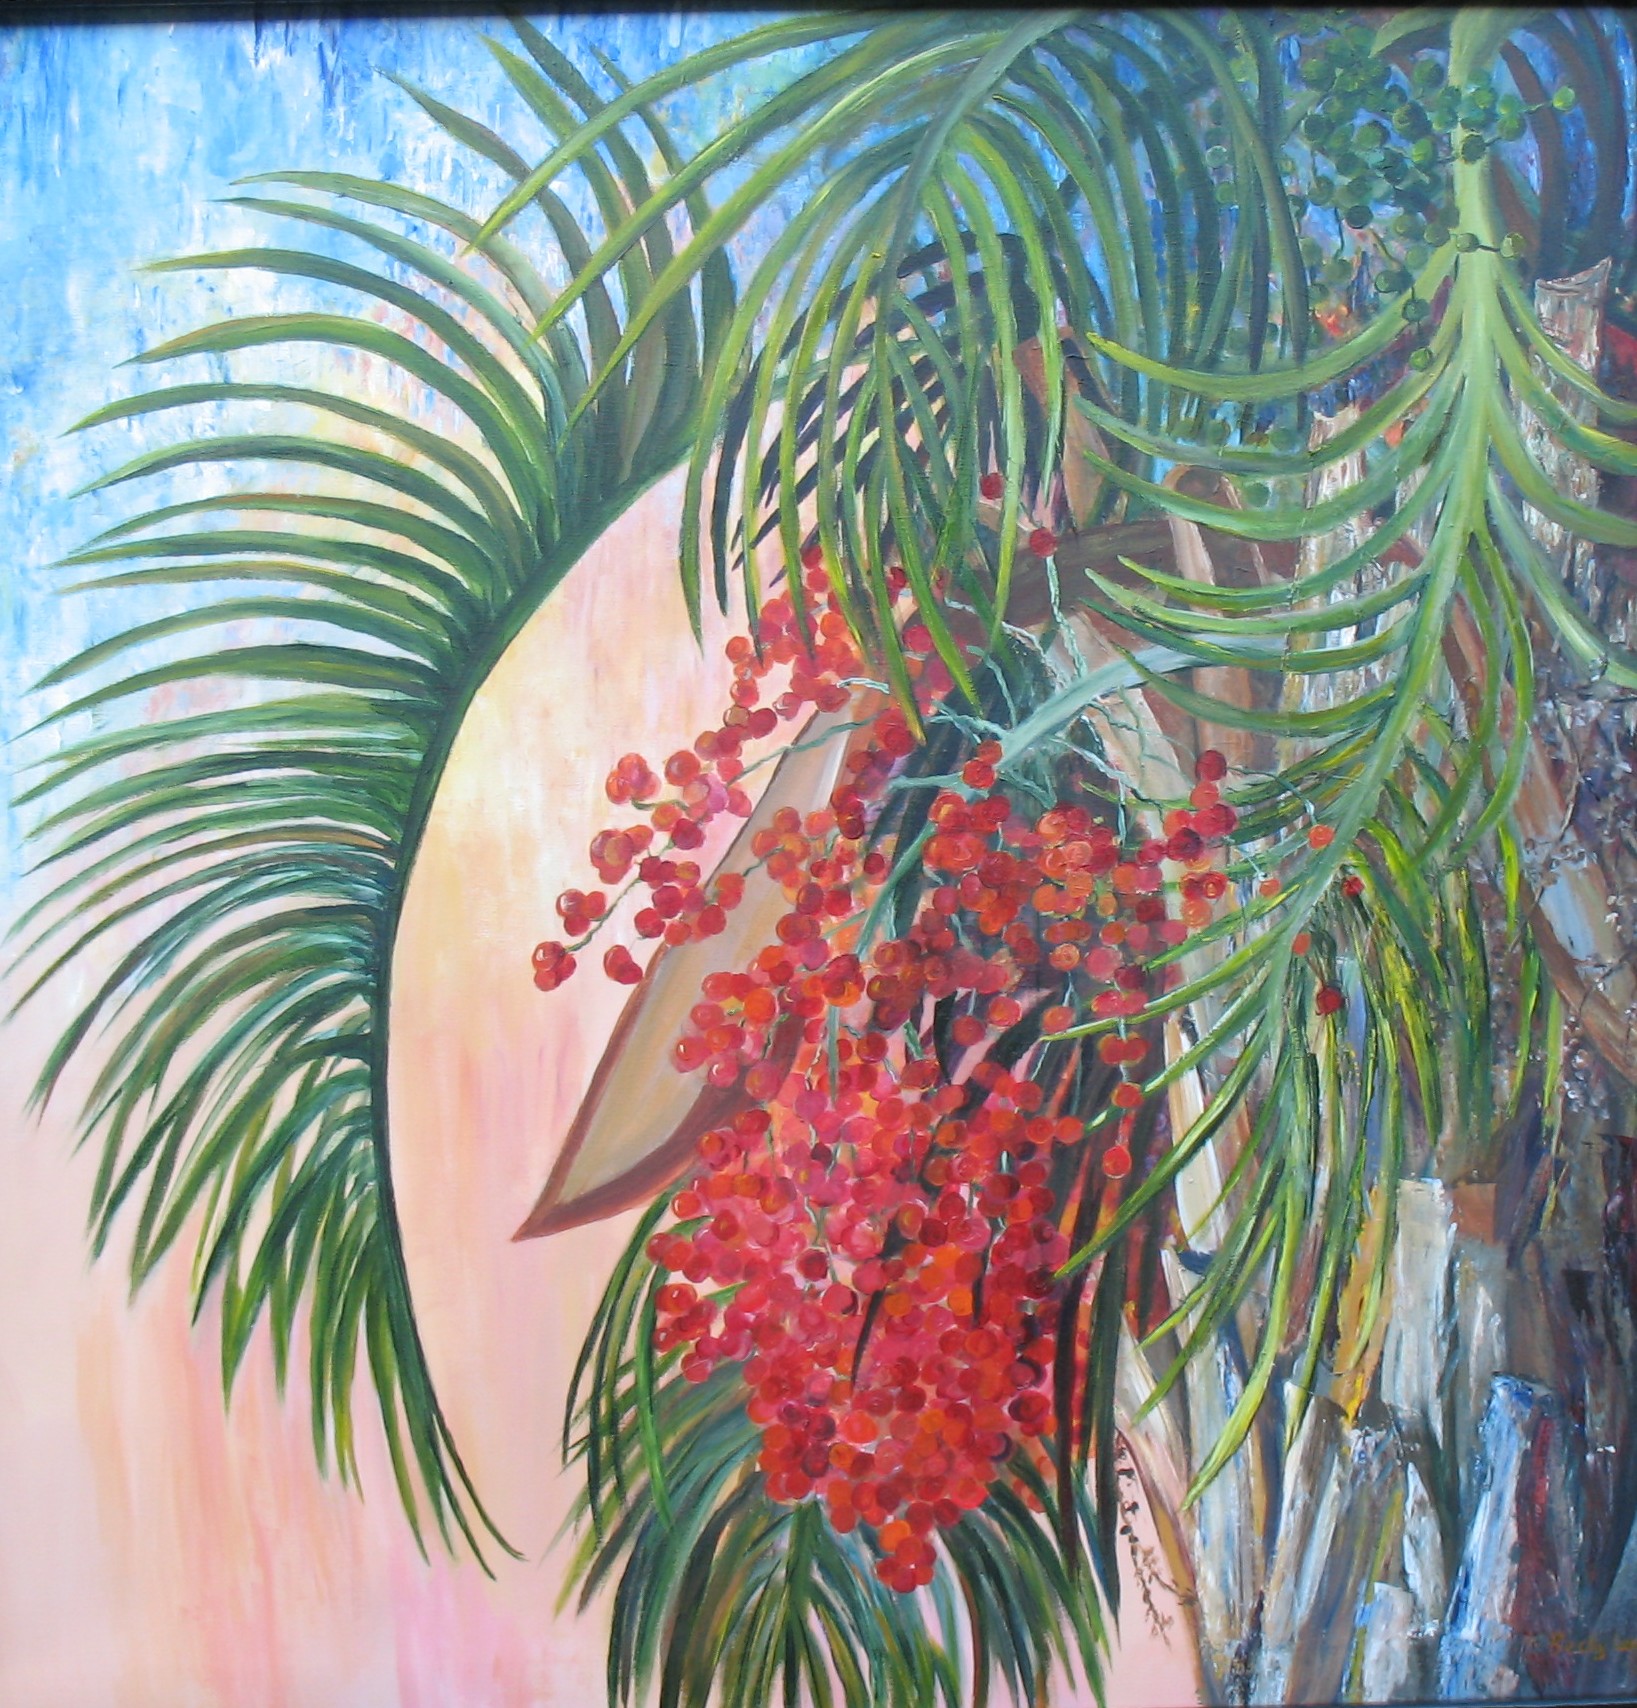 Fruit of the Palm